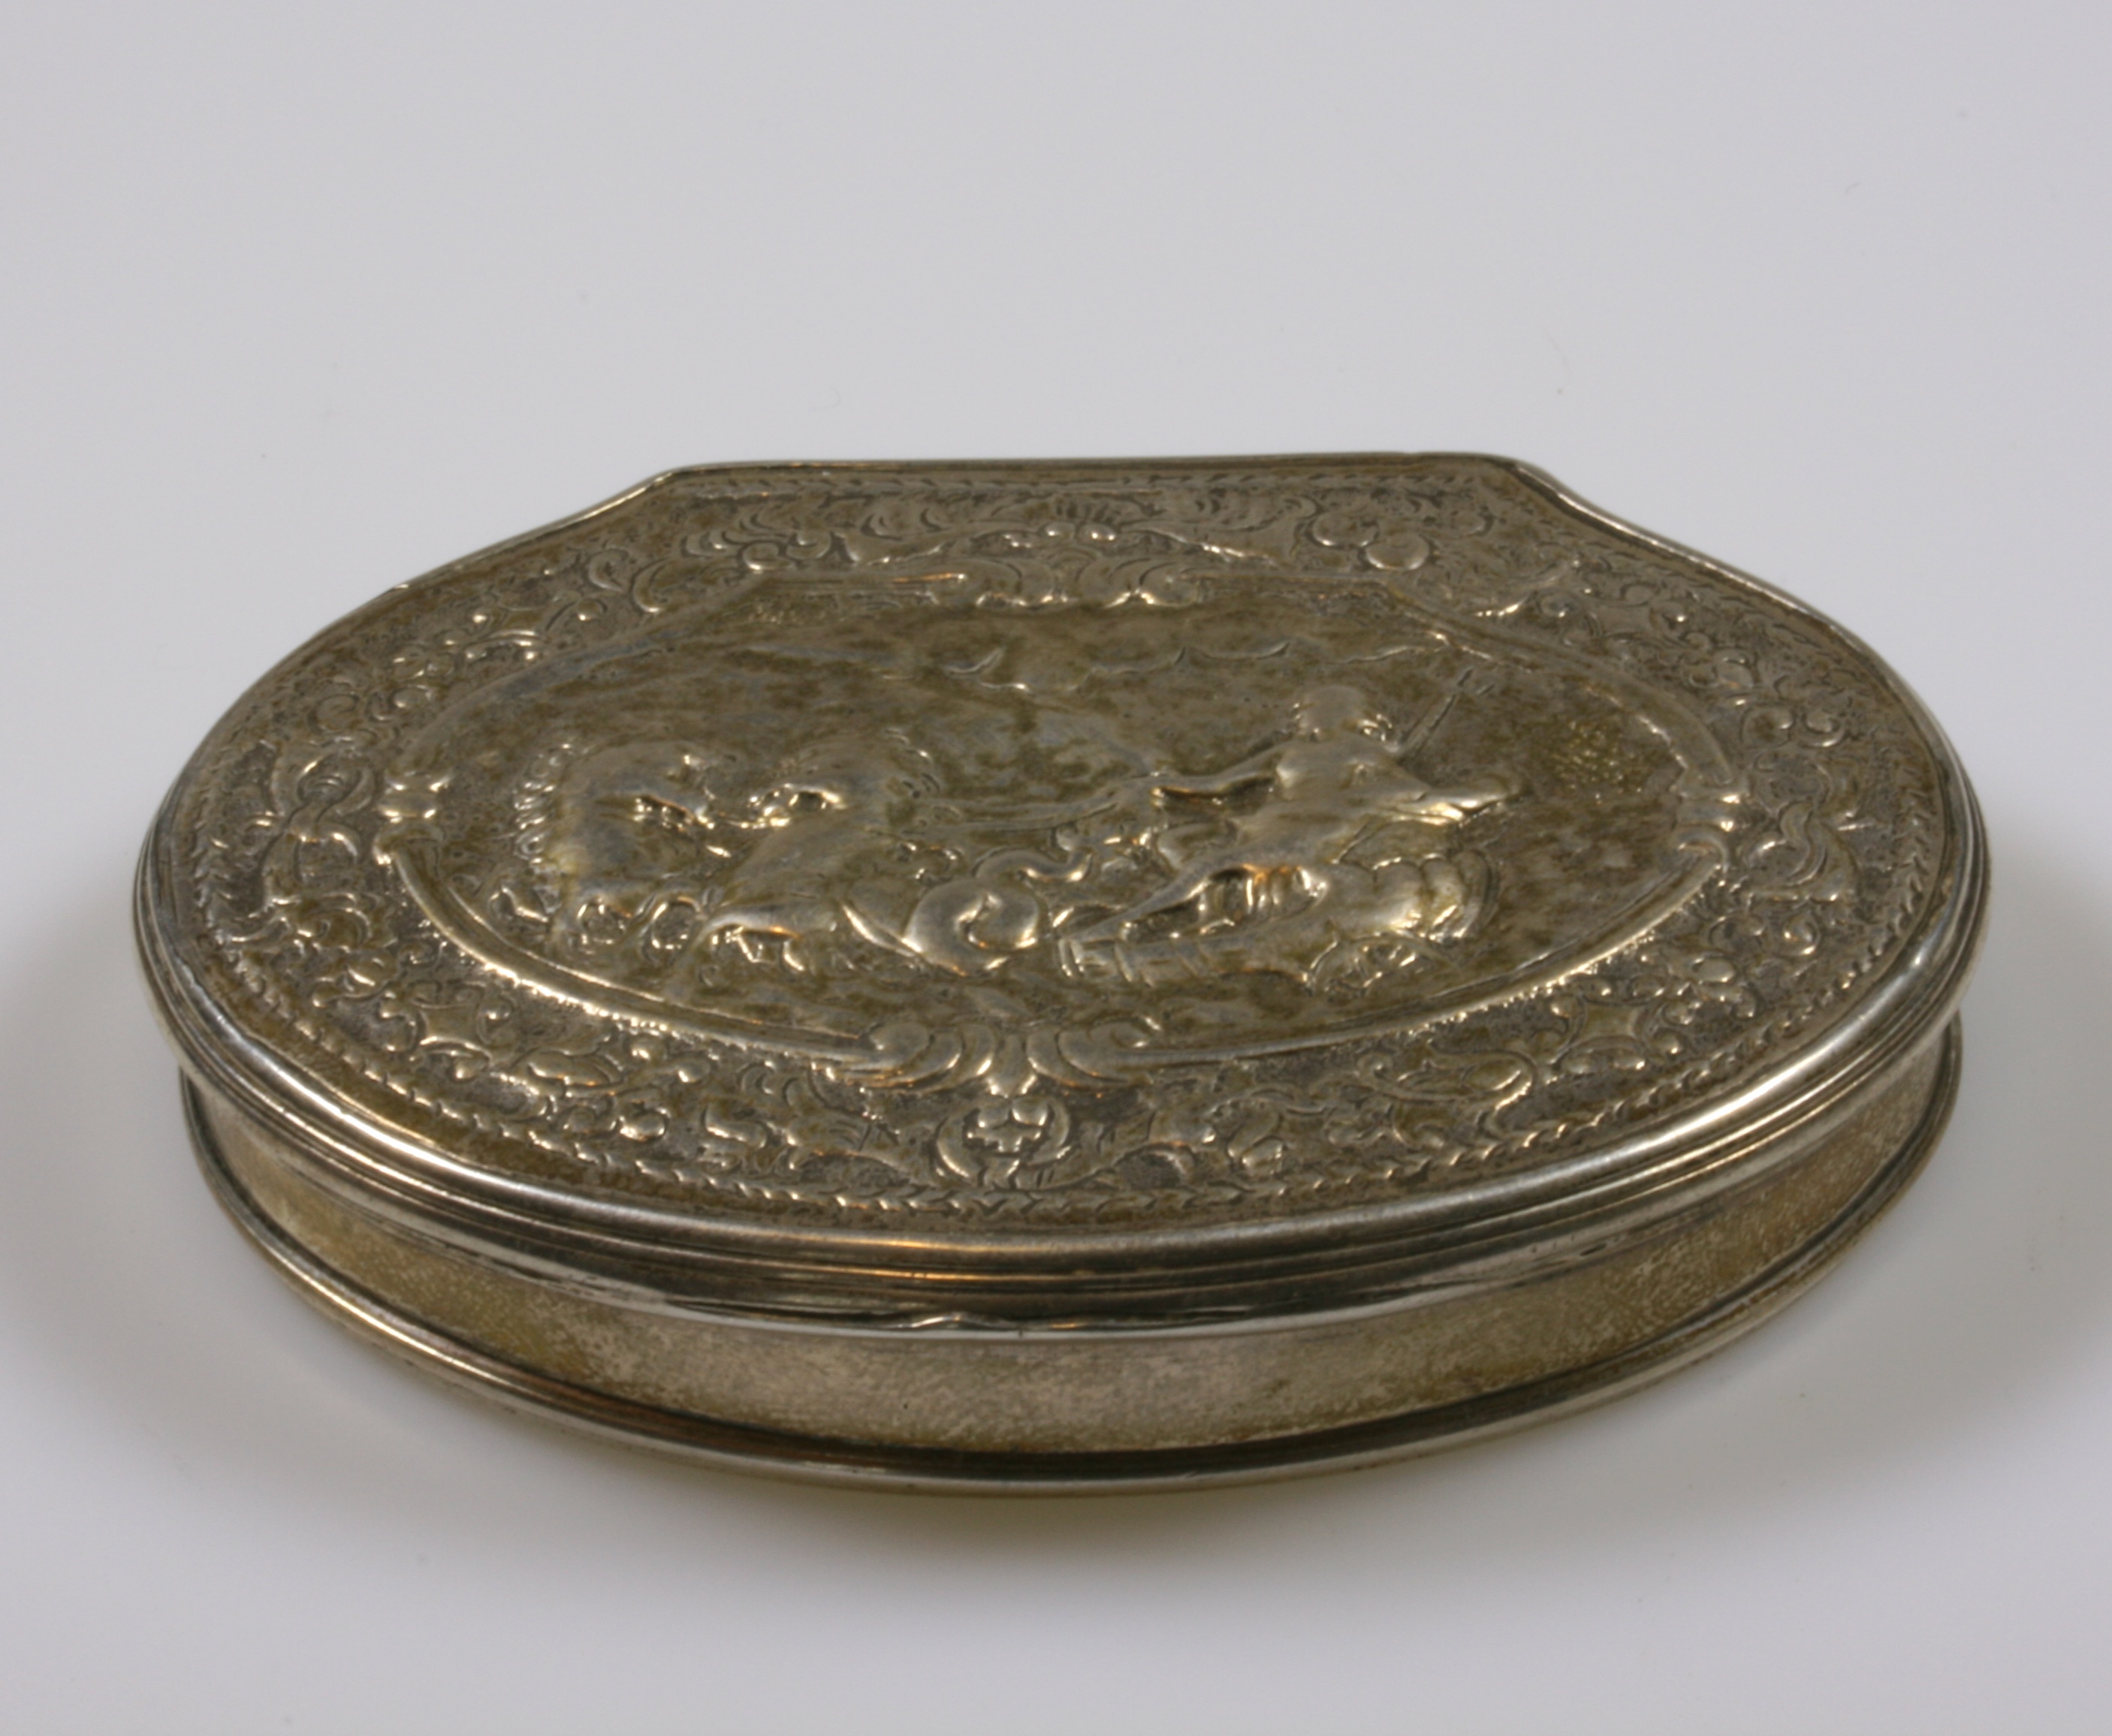 An Early 18th Century Silver Snuff Box. Probably continental but apparently unmarked. Of oval